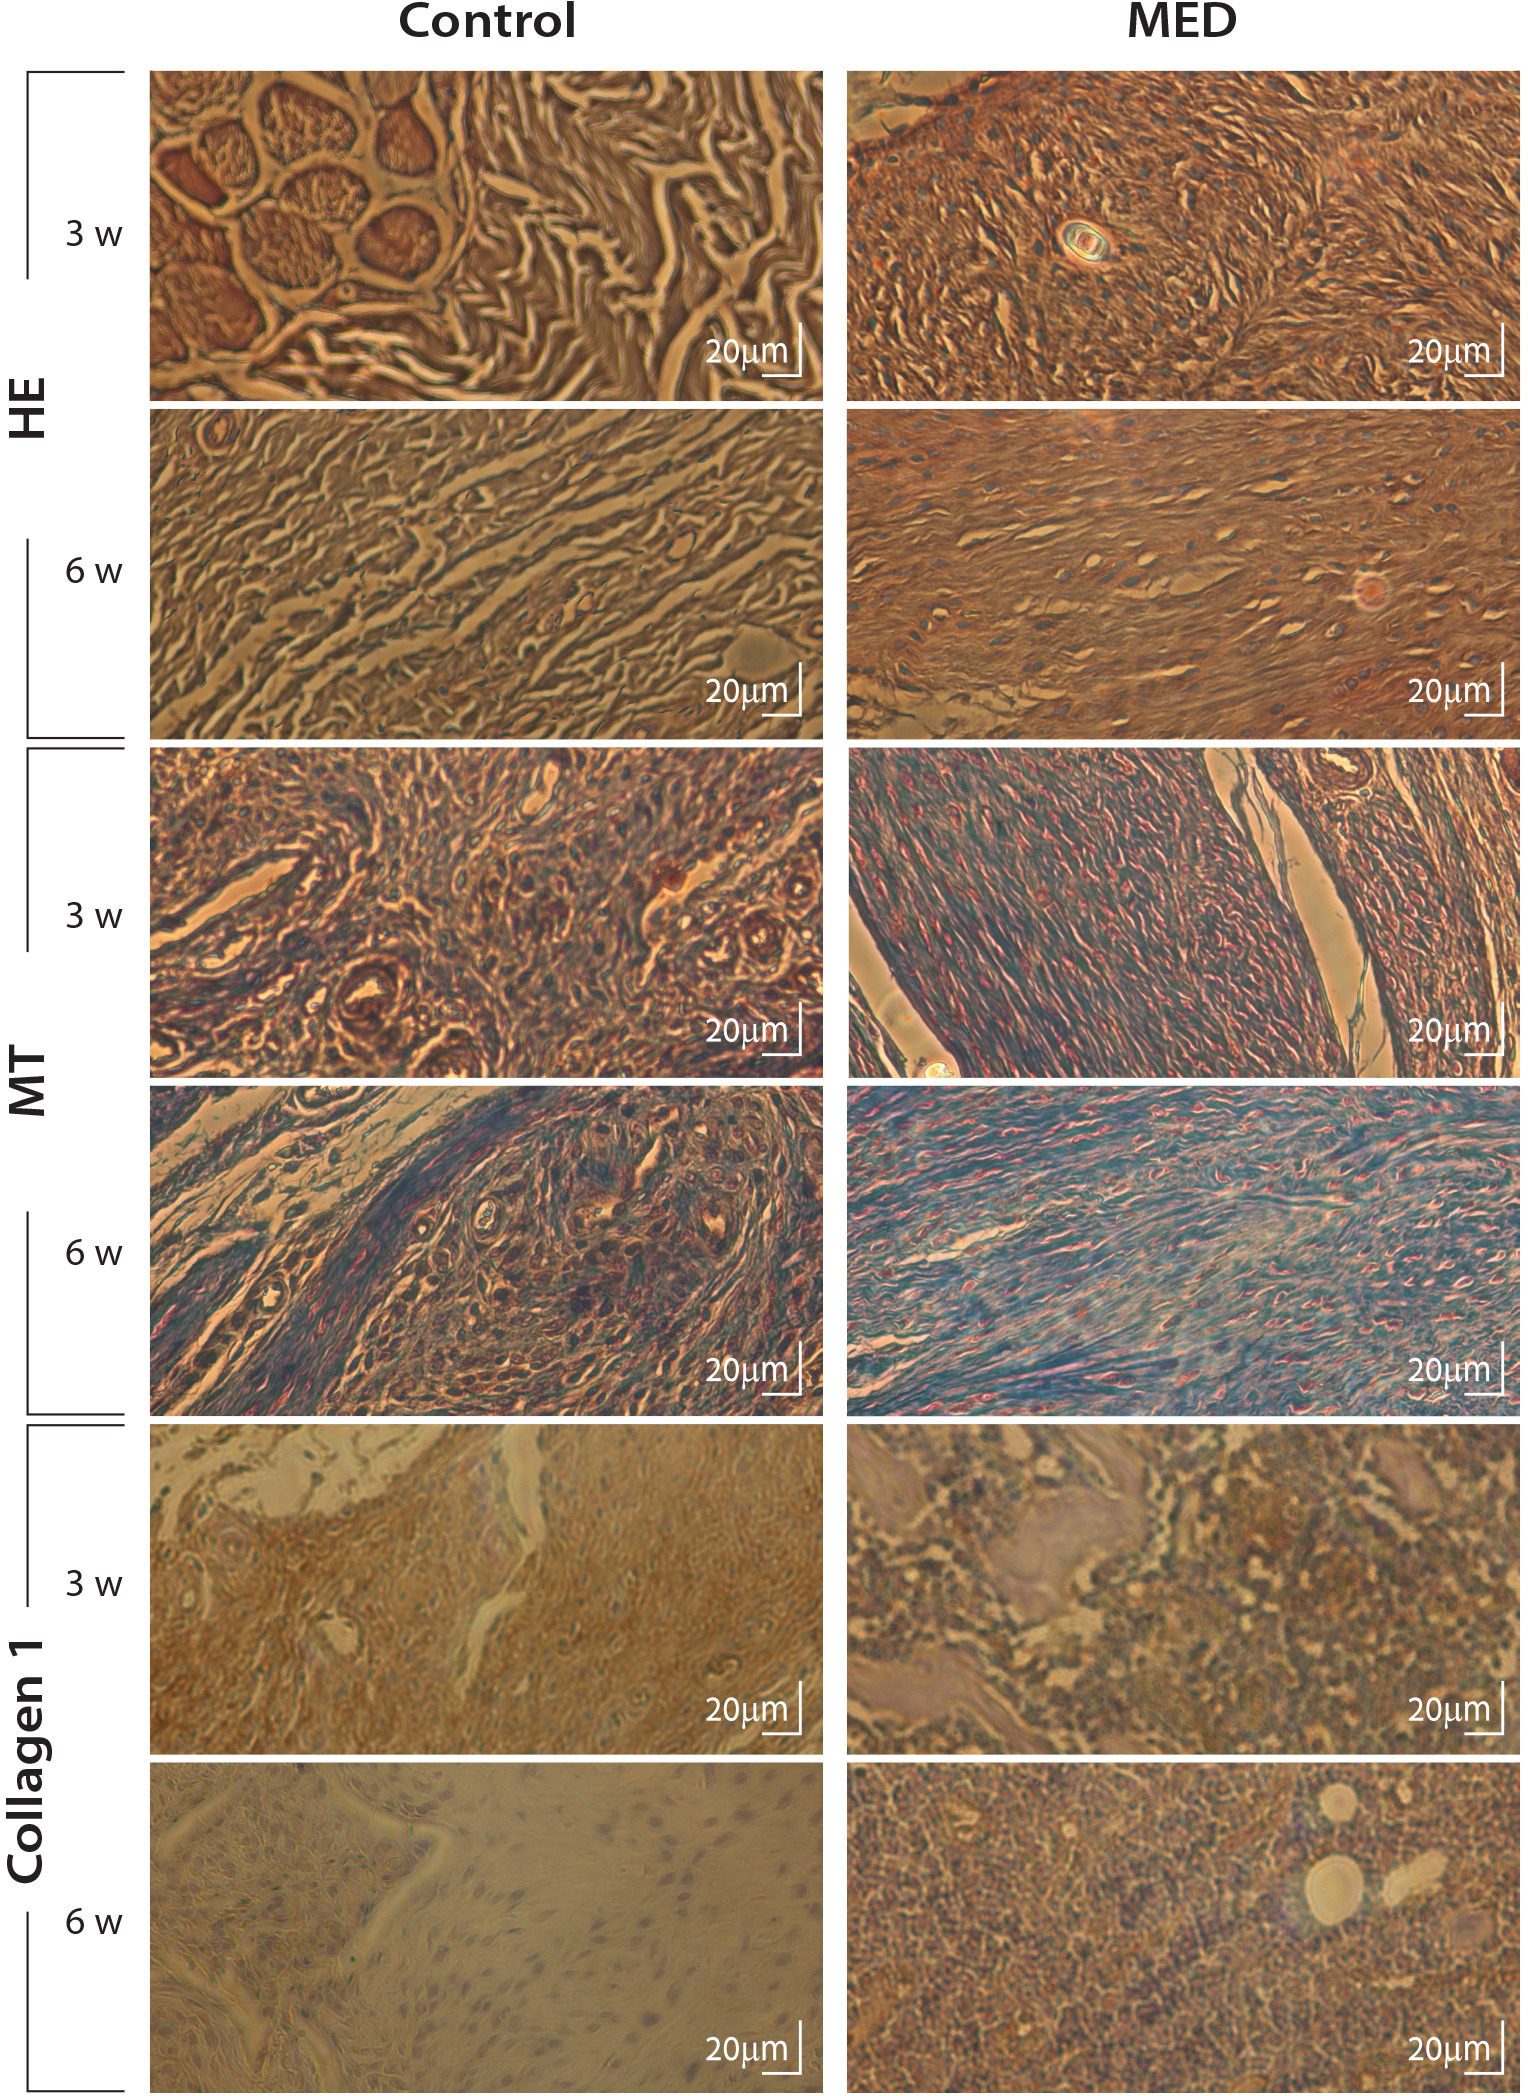 Fig. 5 
            Representative images of histological and immunohistochemical analyses. Miniaturized electromagnetic device (MED) and control groups were evaluated at three and six weeks. Tendon immunohistochemistry revealed a prominent increase in type I collagen at the repair site at three weeks following continuous pulsed electromagnetic field (PEMF) treatment compared with controls, but these differences were less notable after six weeks. HE, haematoxylin and eosin; MT, Masson’s trichrome.
          